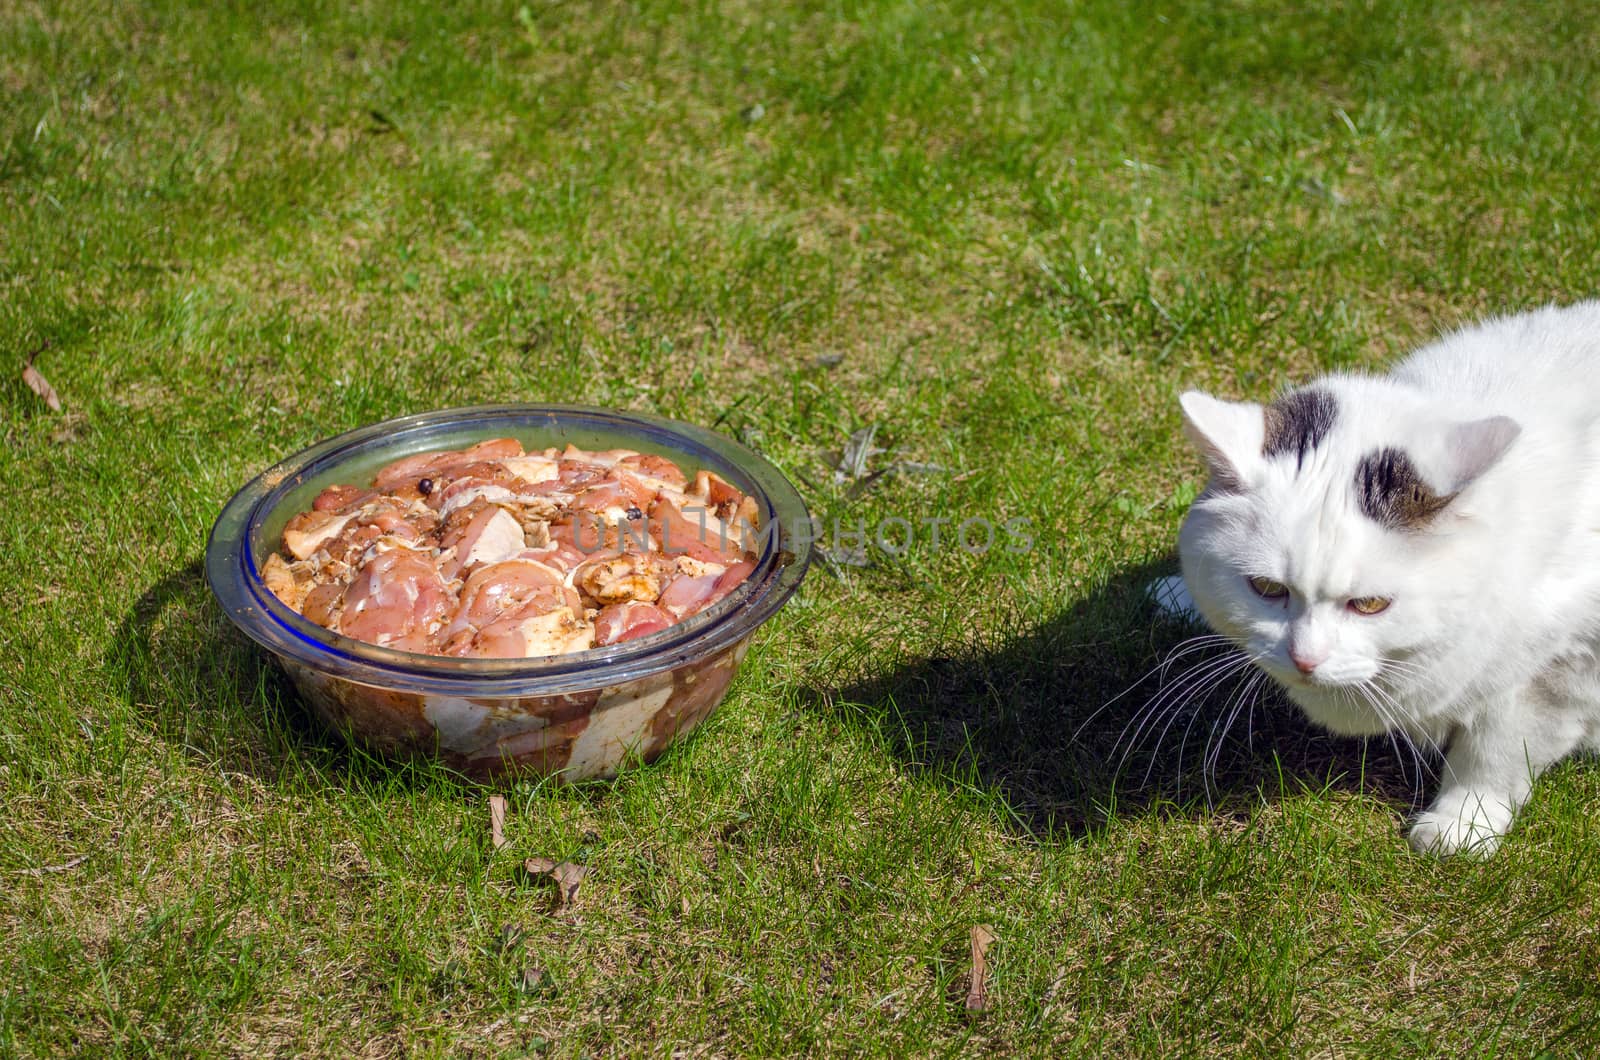 large glass bowl with the marinated pork pieces outside in the meadow next curious white cat